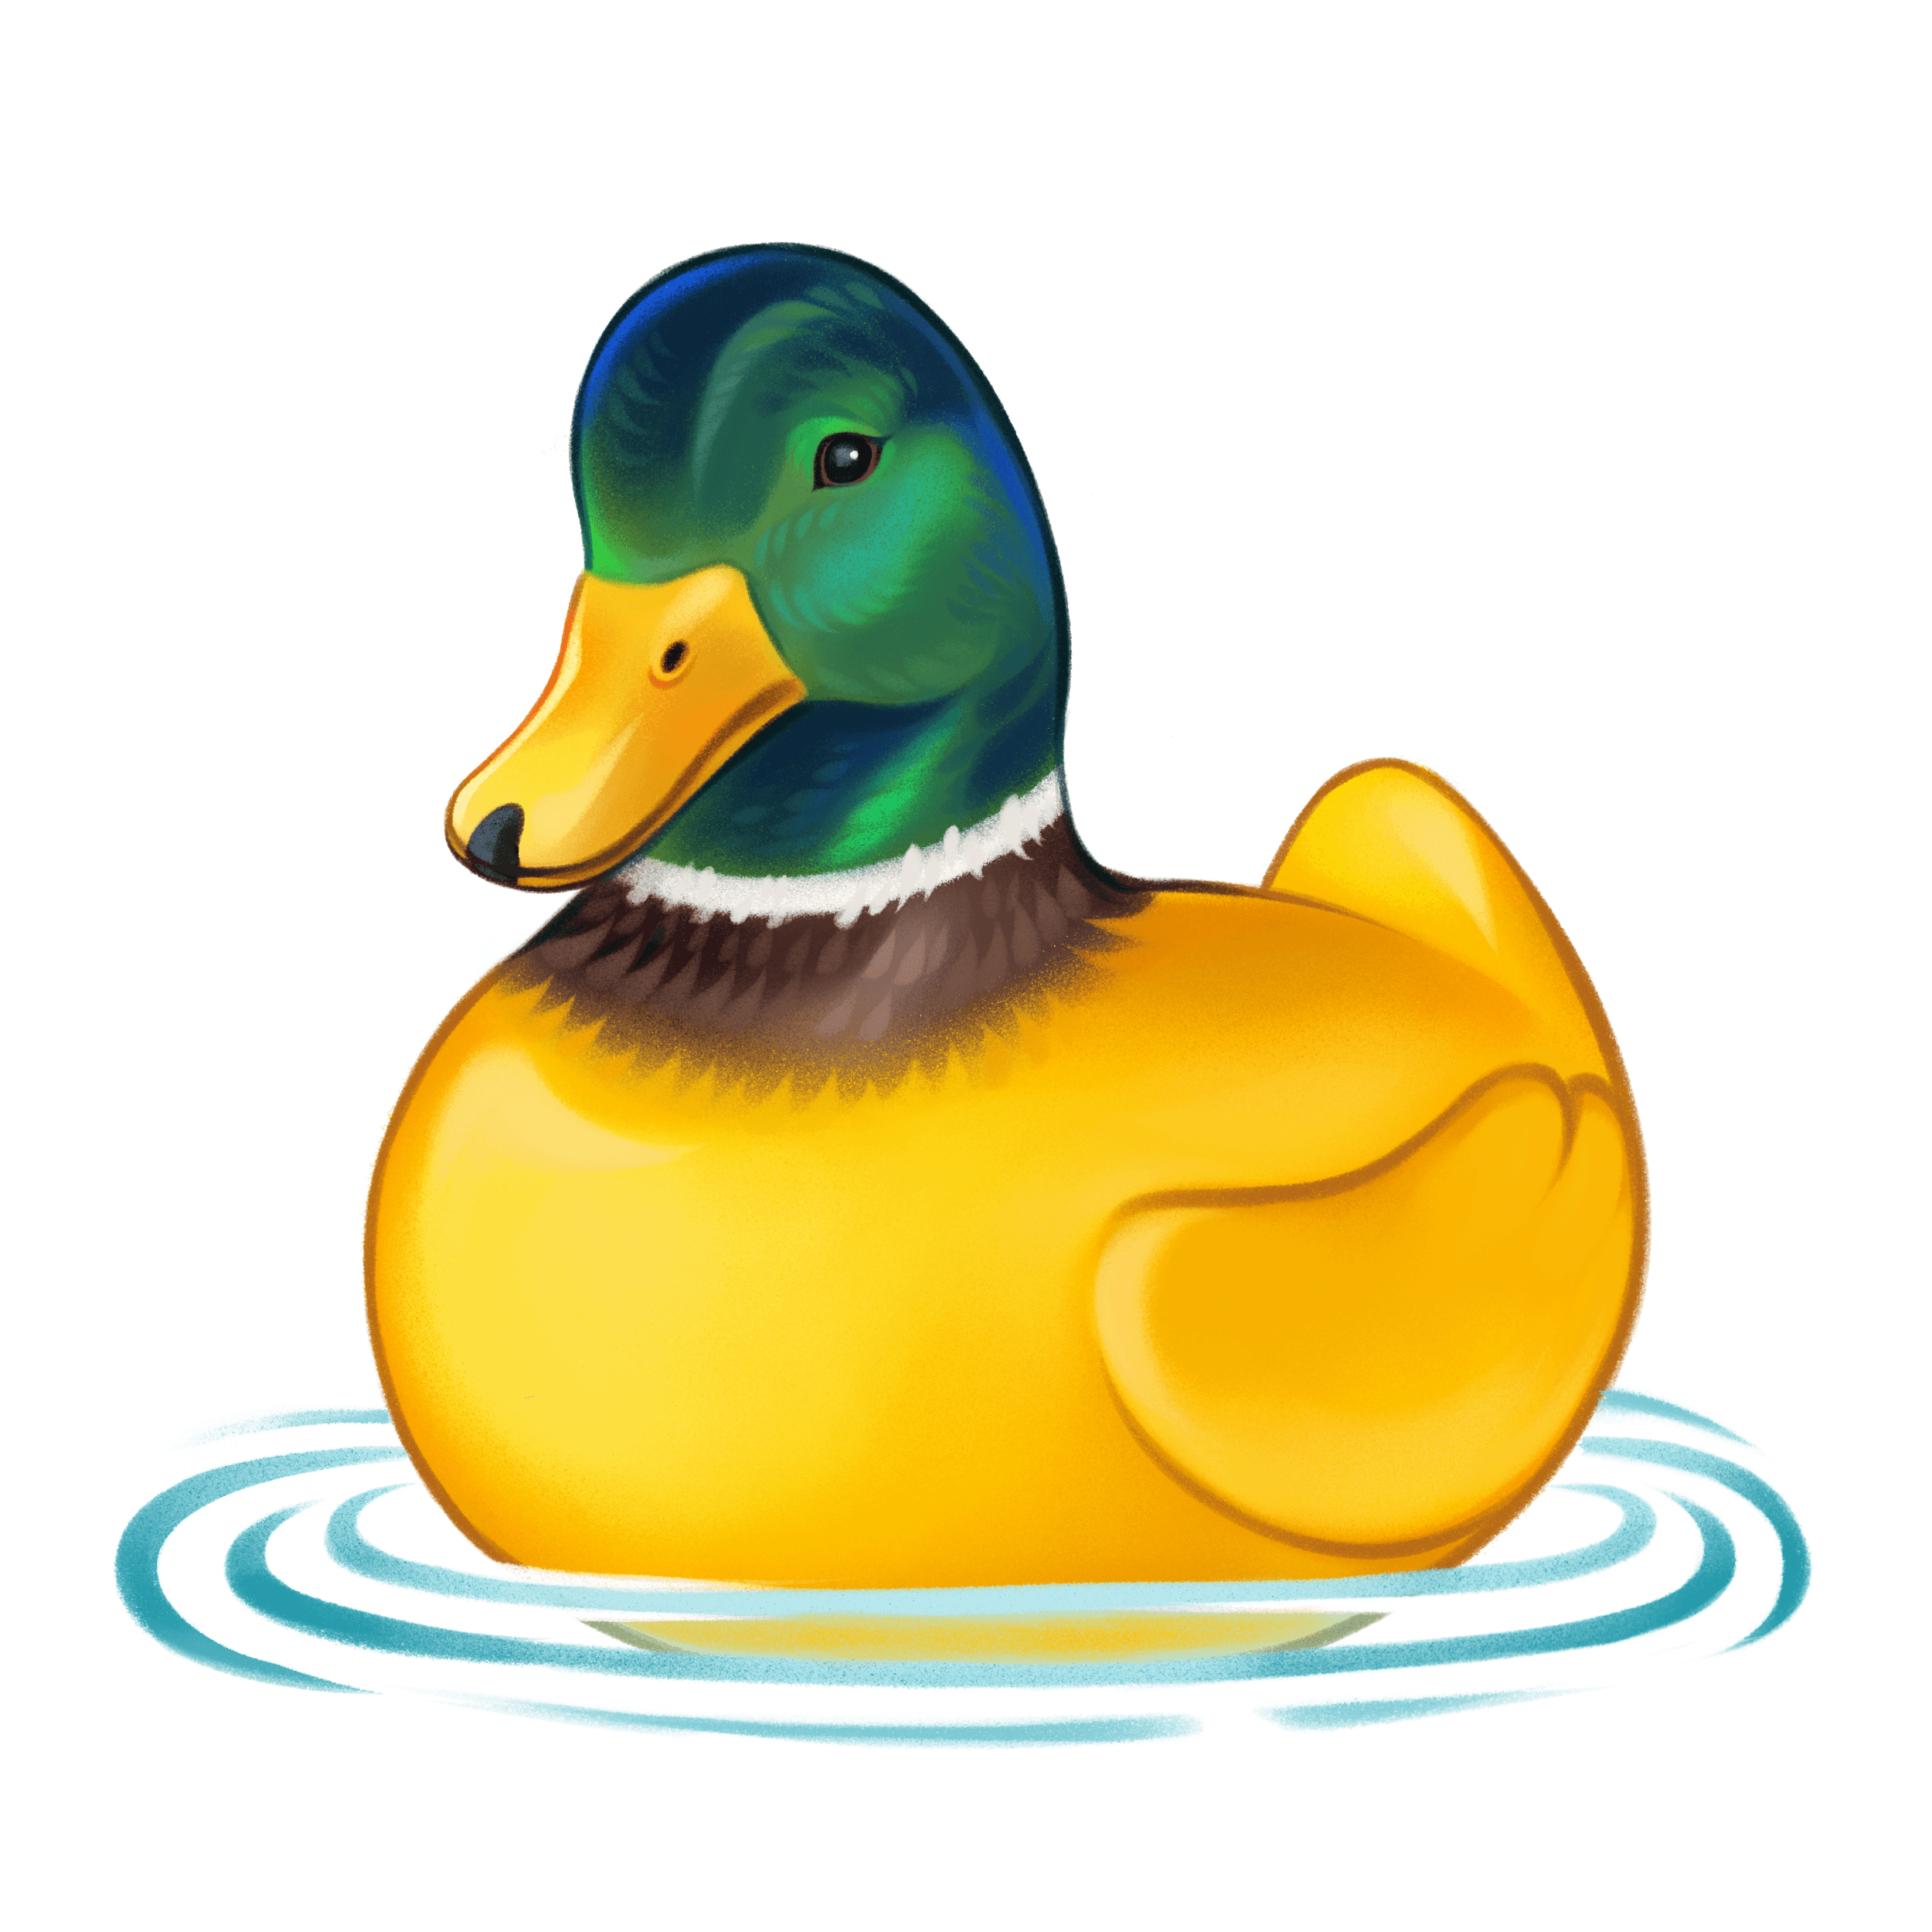 The Drake Rubber Duck